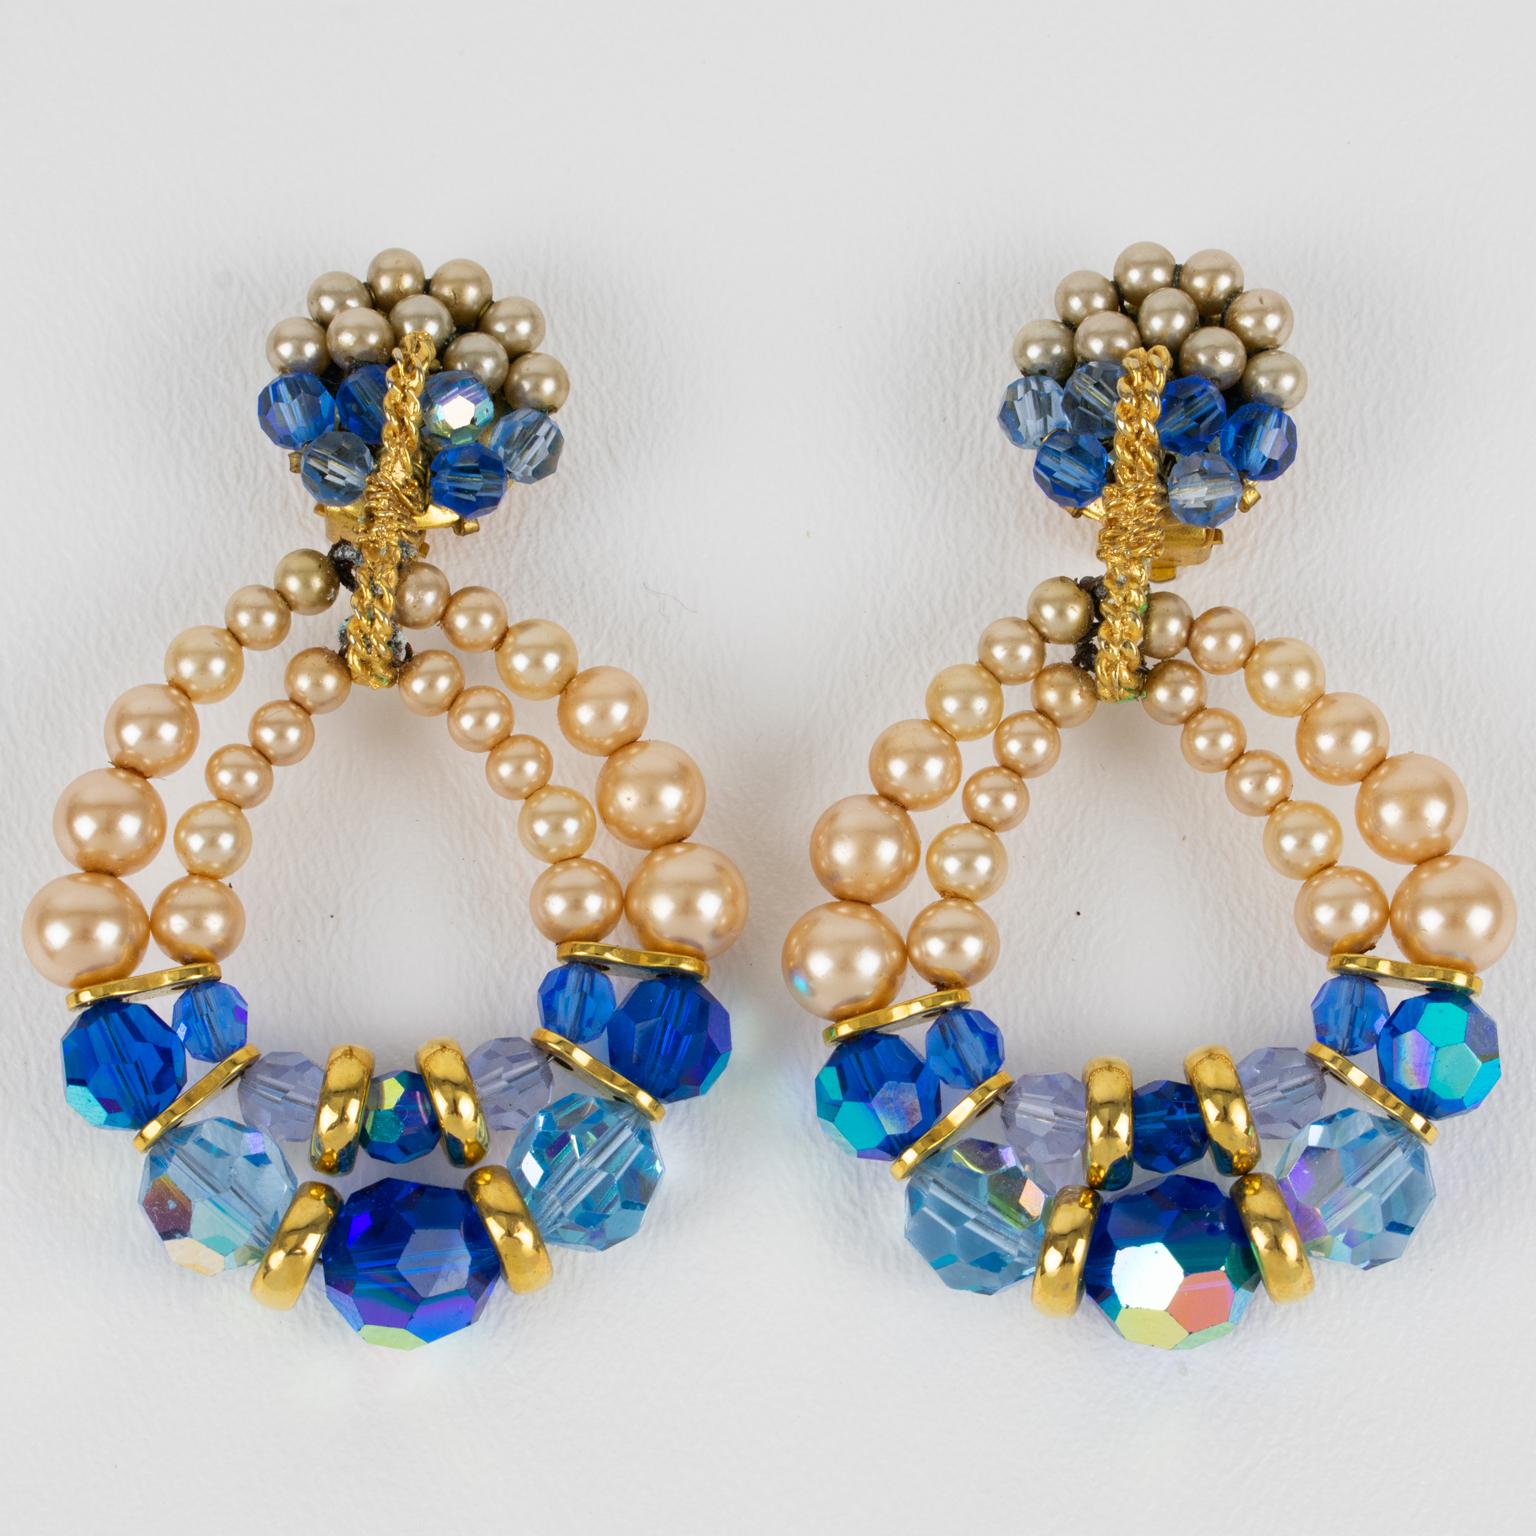 Francoise Montague Paris Blue Crystal and Pearls Dangle Clip Earrings In Excellent Condition For Sale In Atlanta, GA